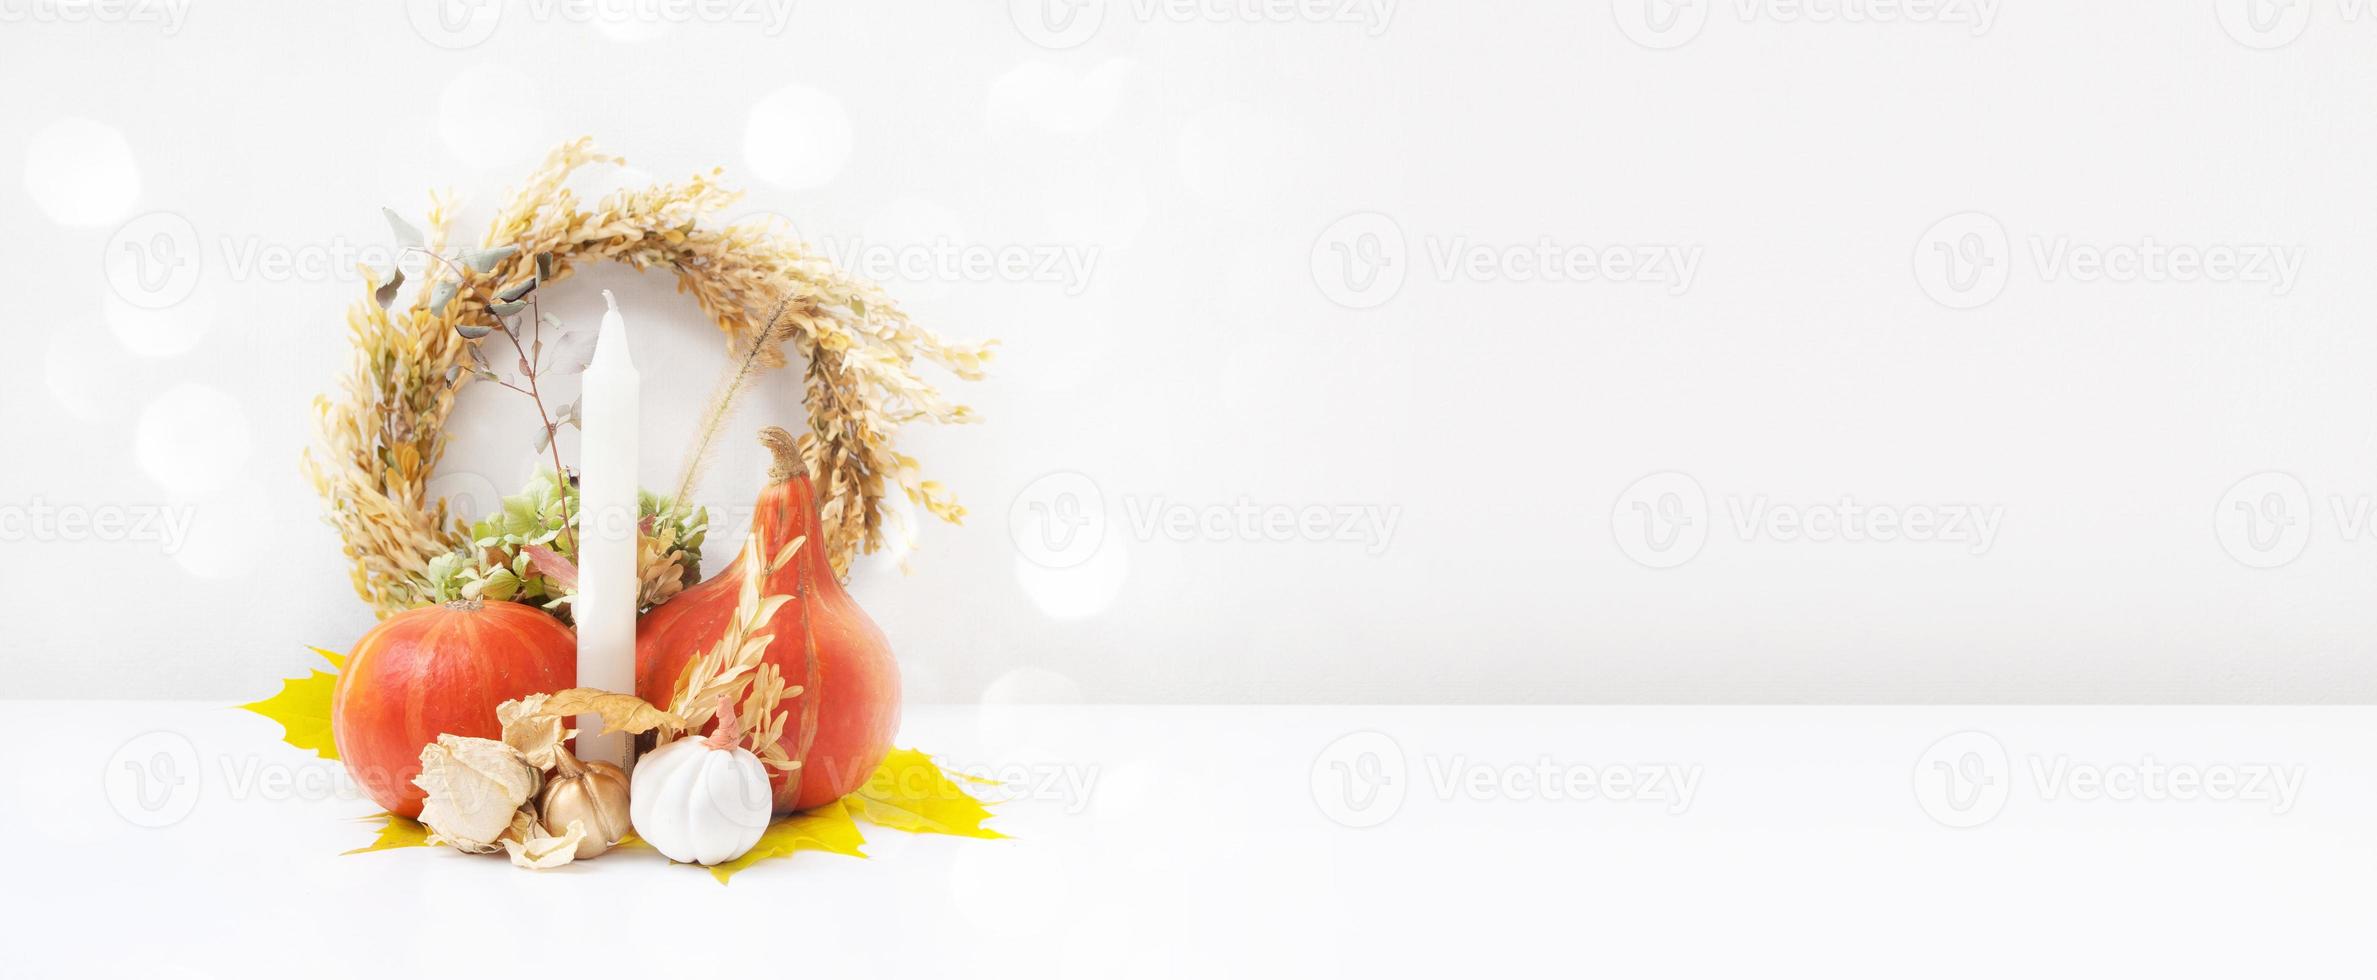 Autumn banner. Dried leaves wreath, pumpkins and candle on white background. Autumn fall and thanksgiving day concept. Still life photo